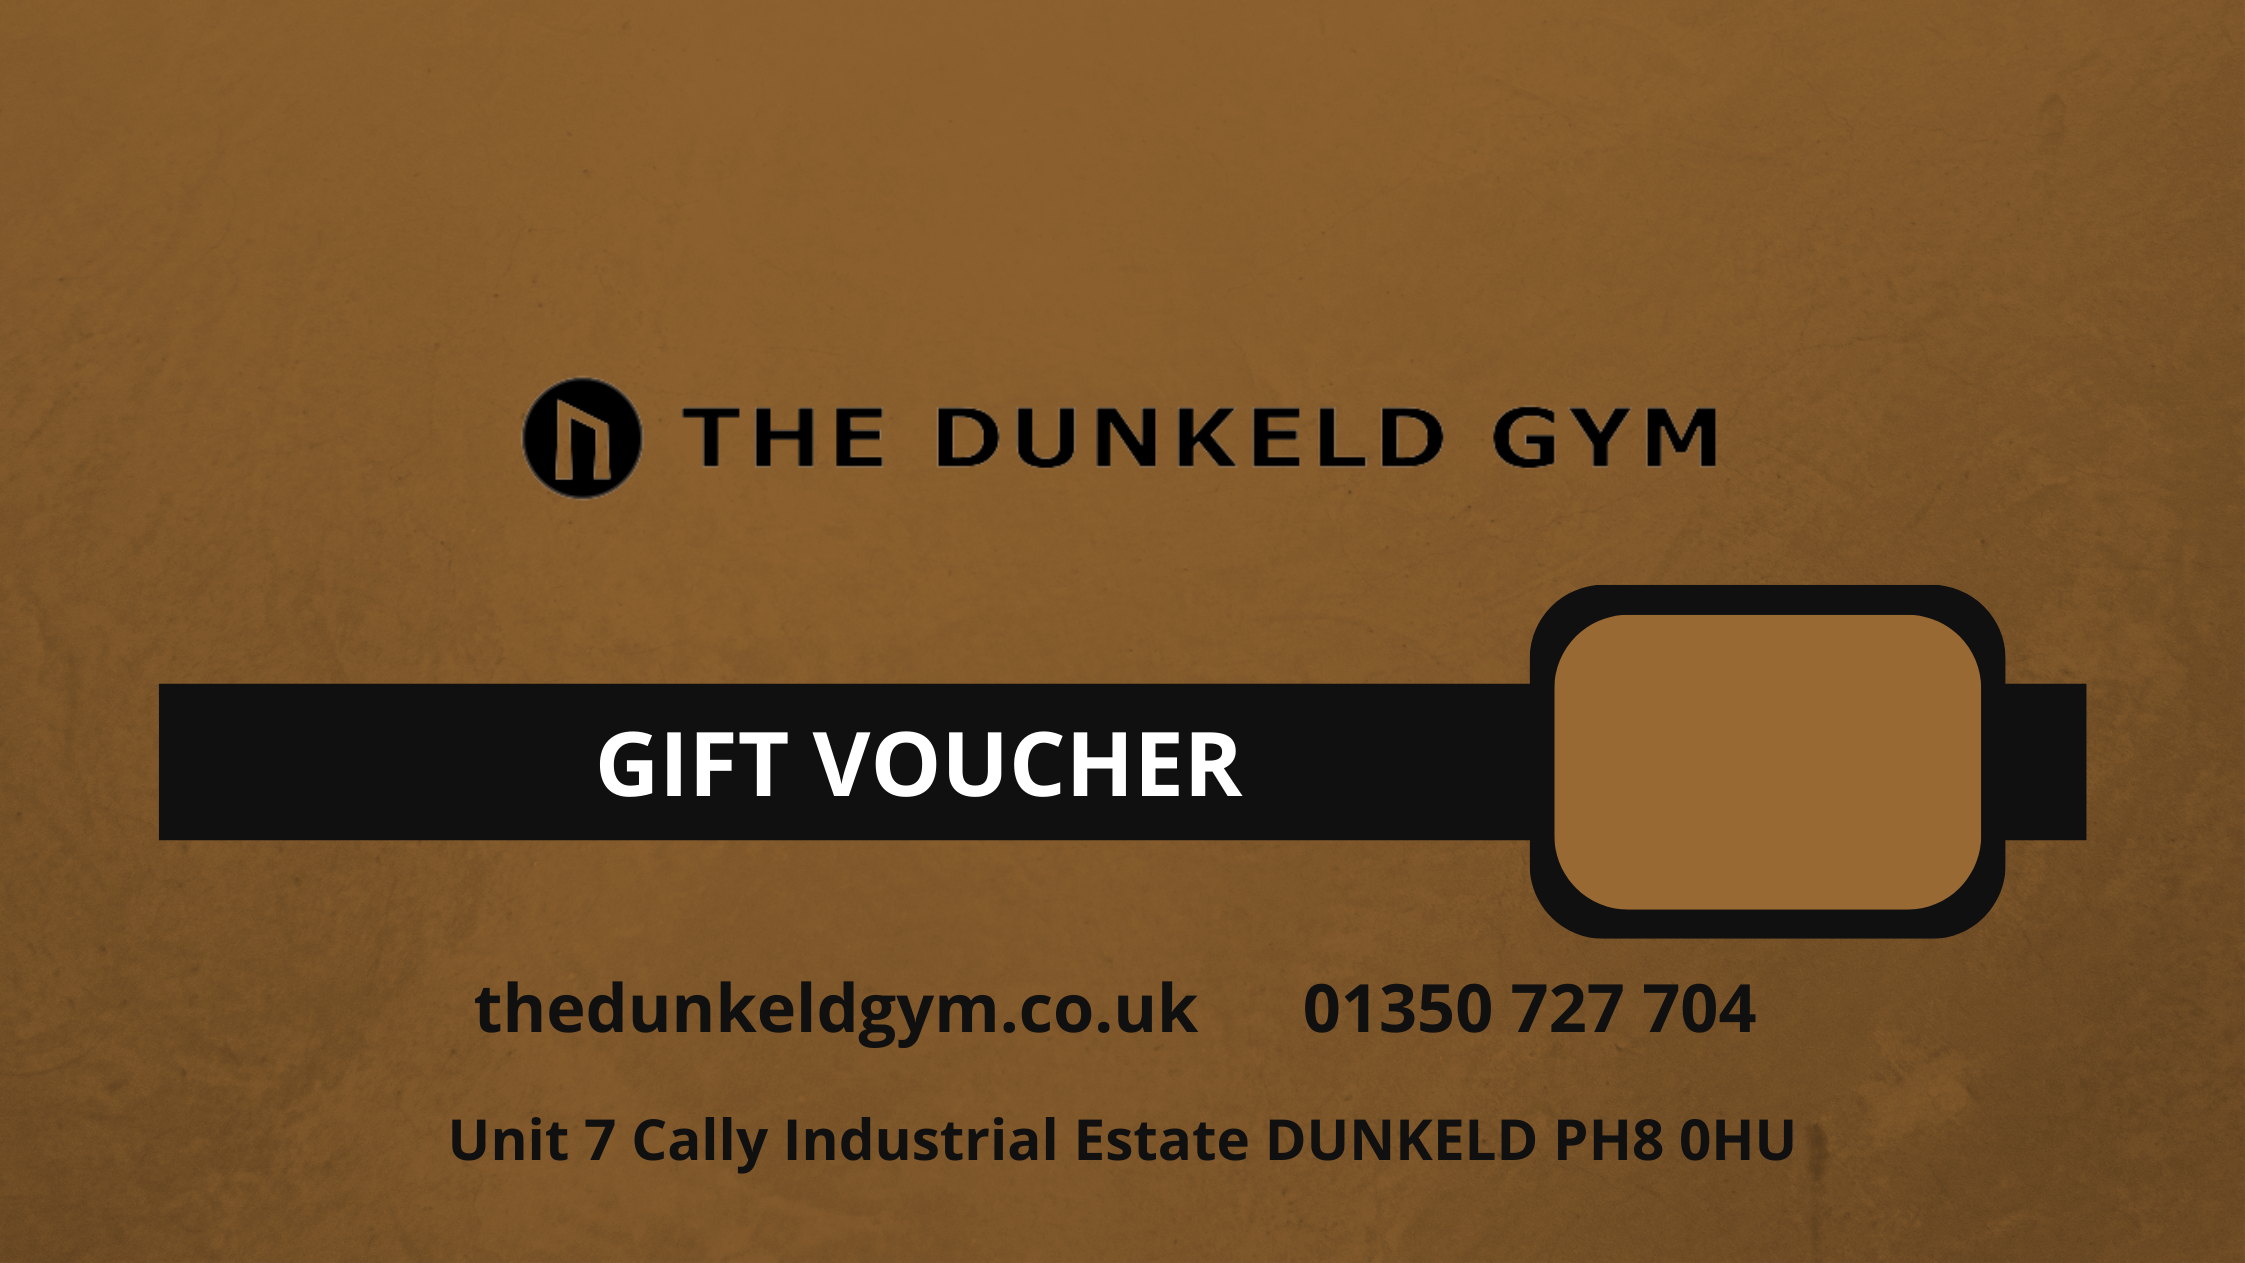 Gift voucher example The Dunkeld Gym - Alison Annison.png